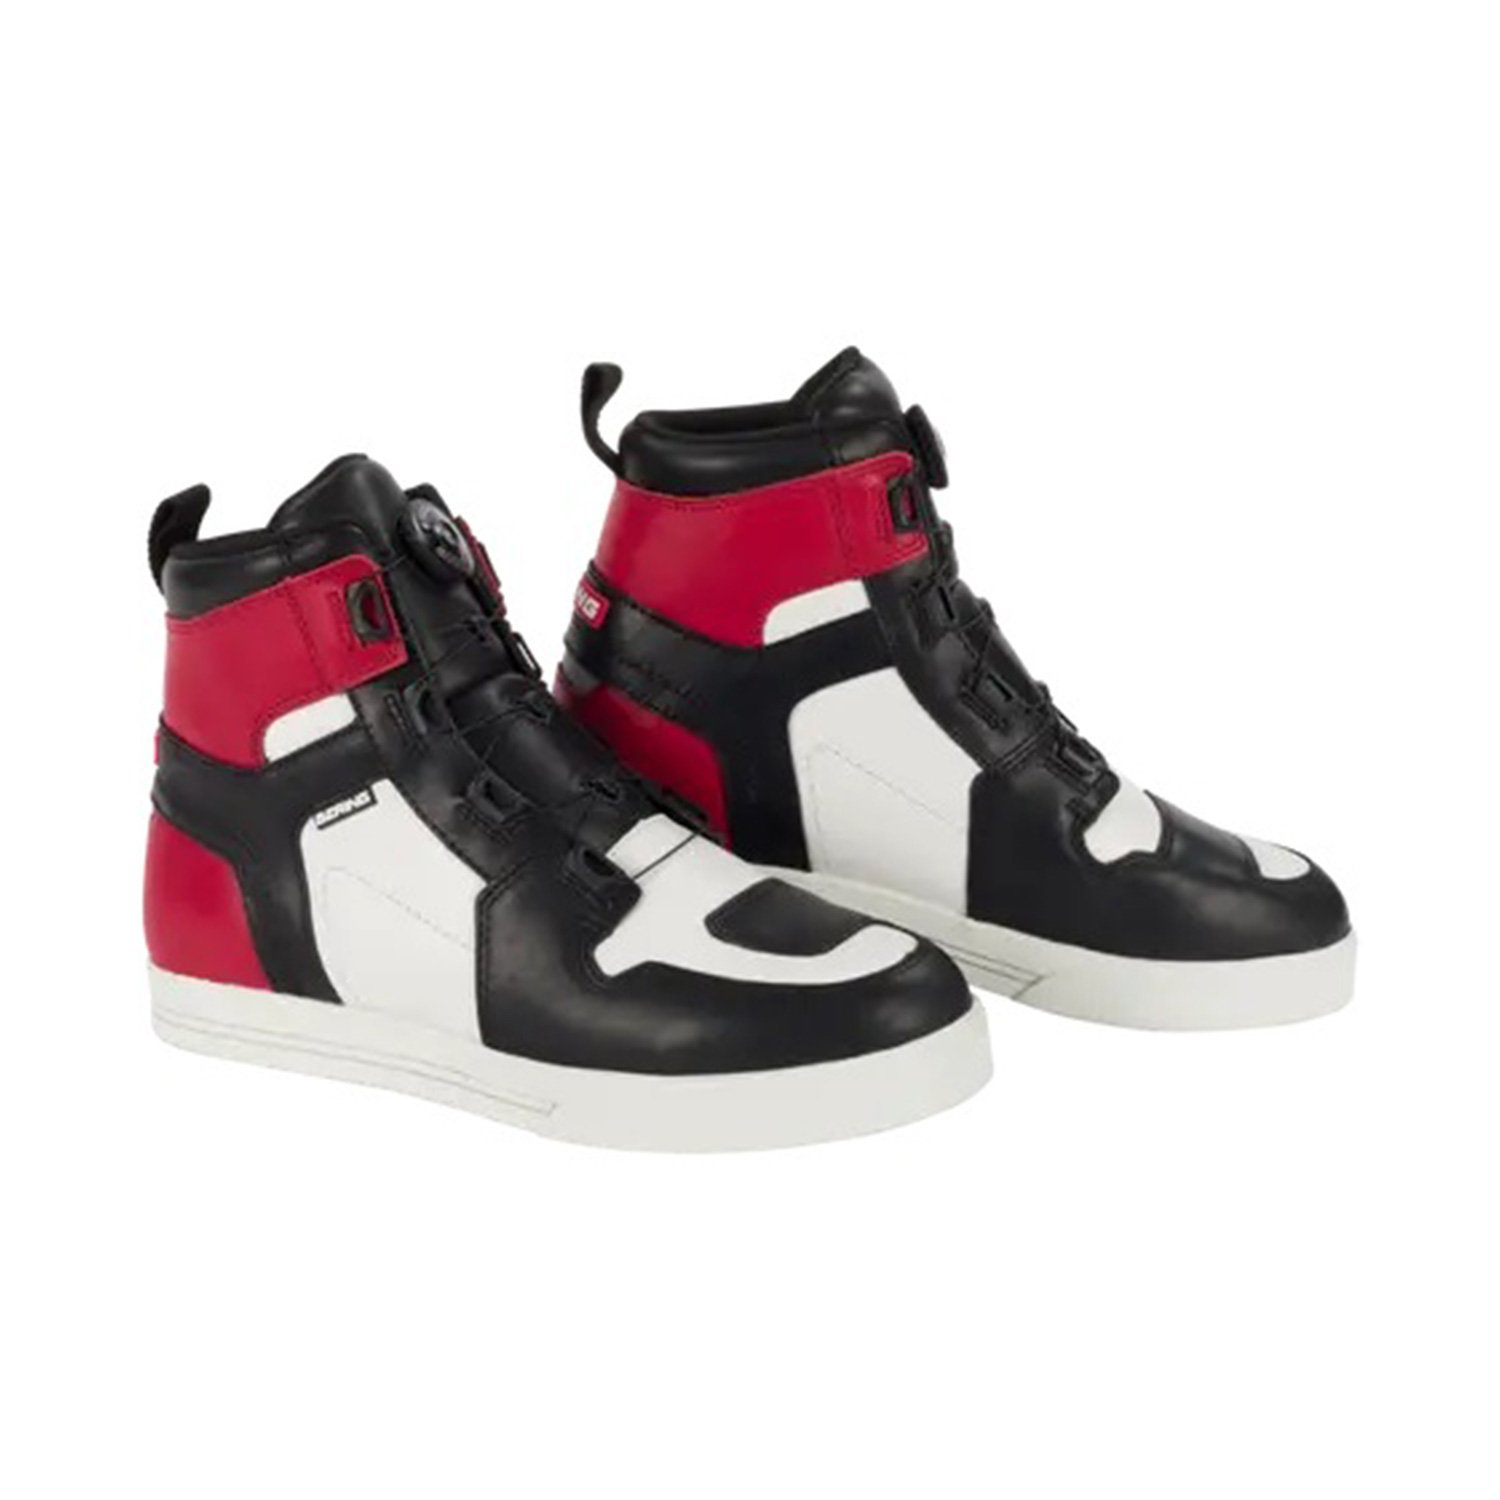 Image of Bering Sneakers Reflex A-Top Black White Red Size 44 ID 3660815176702